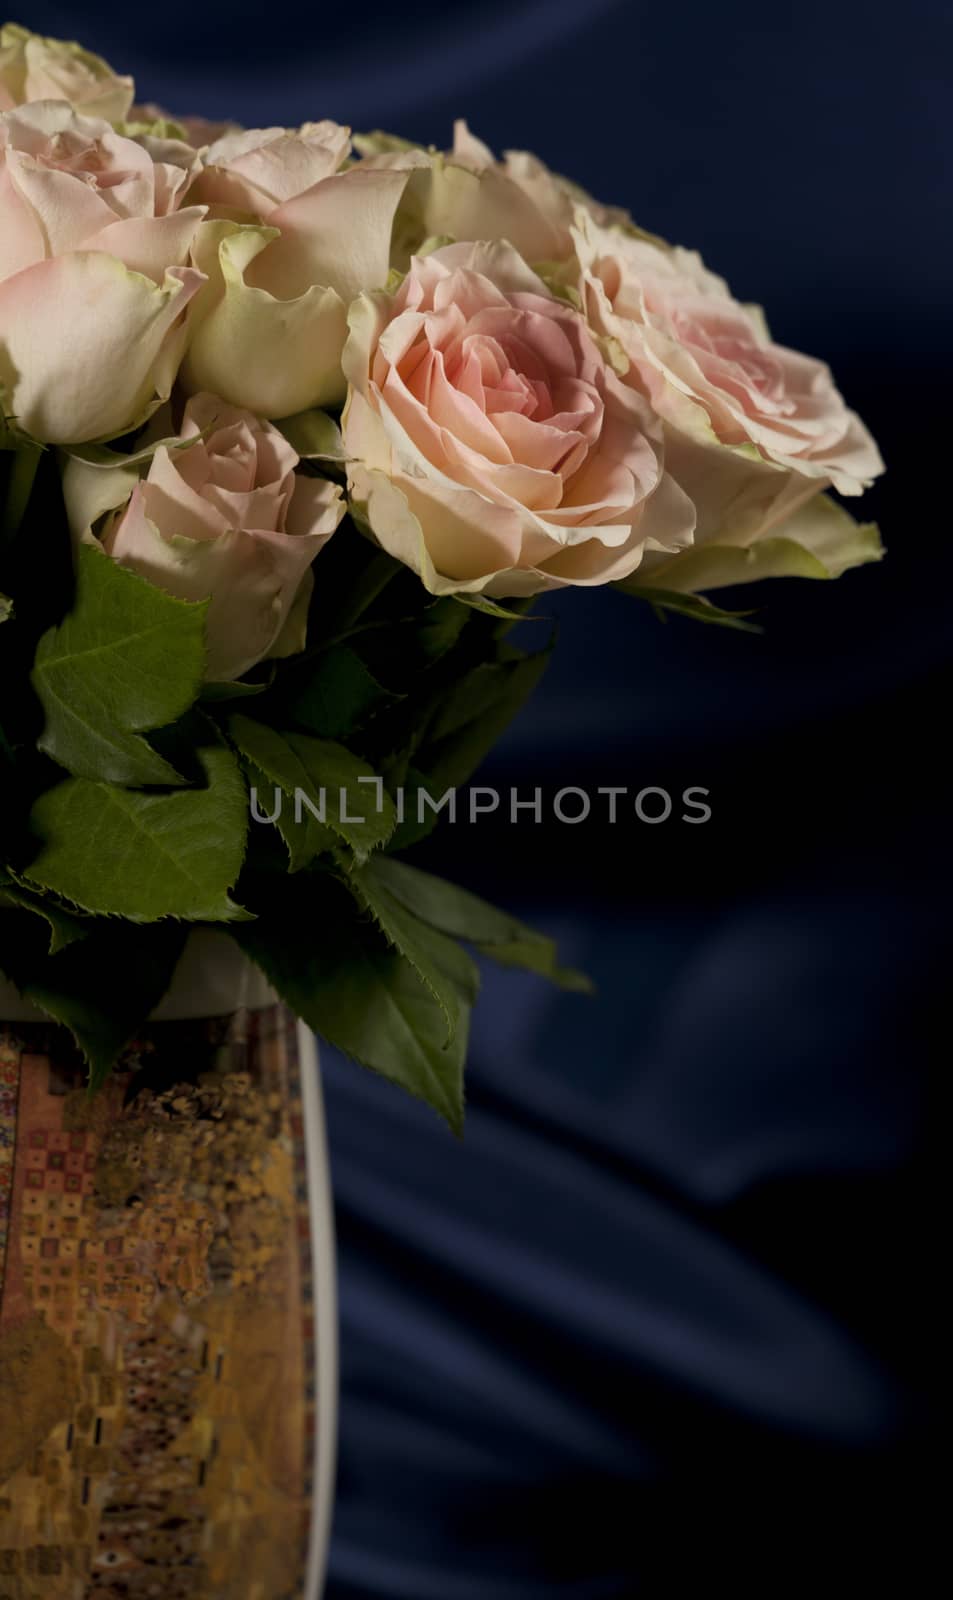 Large bouquet of roses in vase by mrivserg